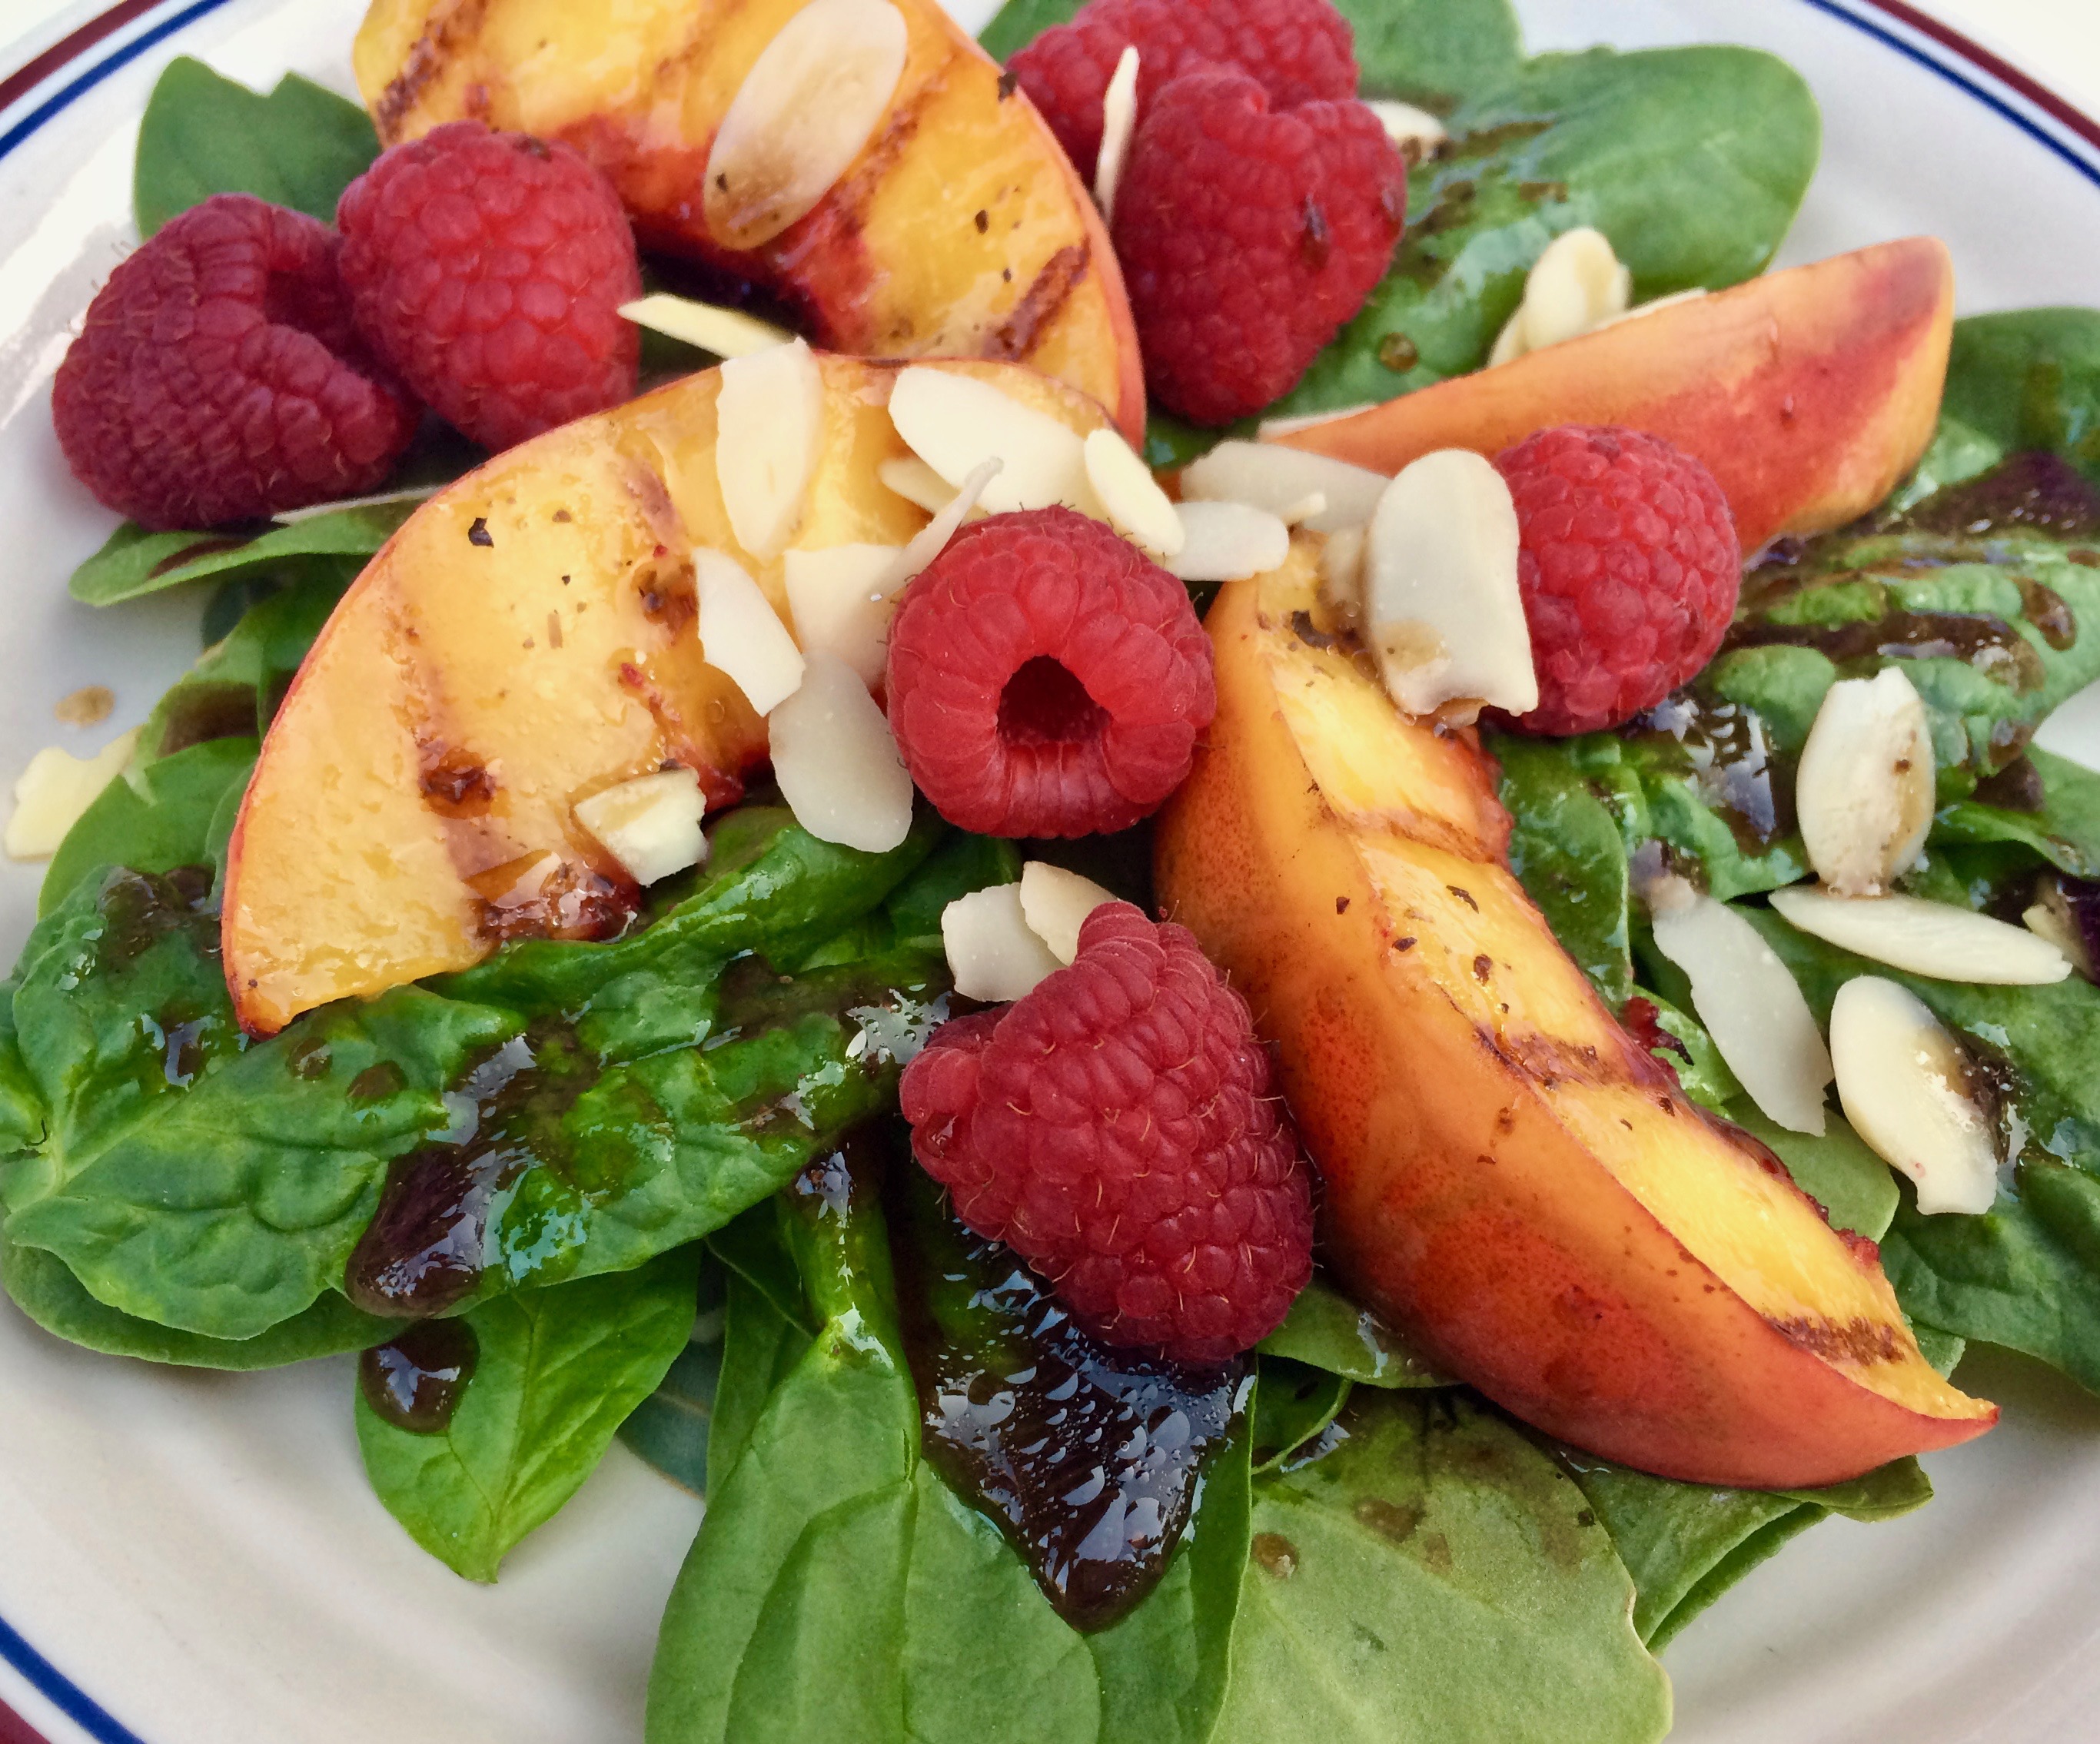 Grilled Peach Salad with Spinach and Raspberries